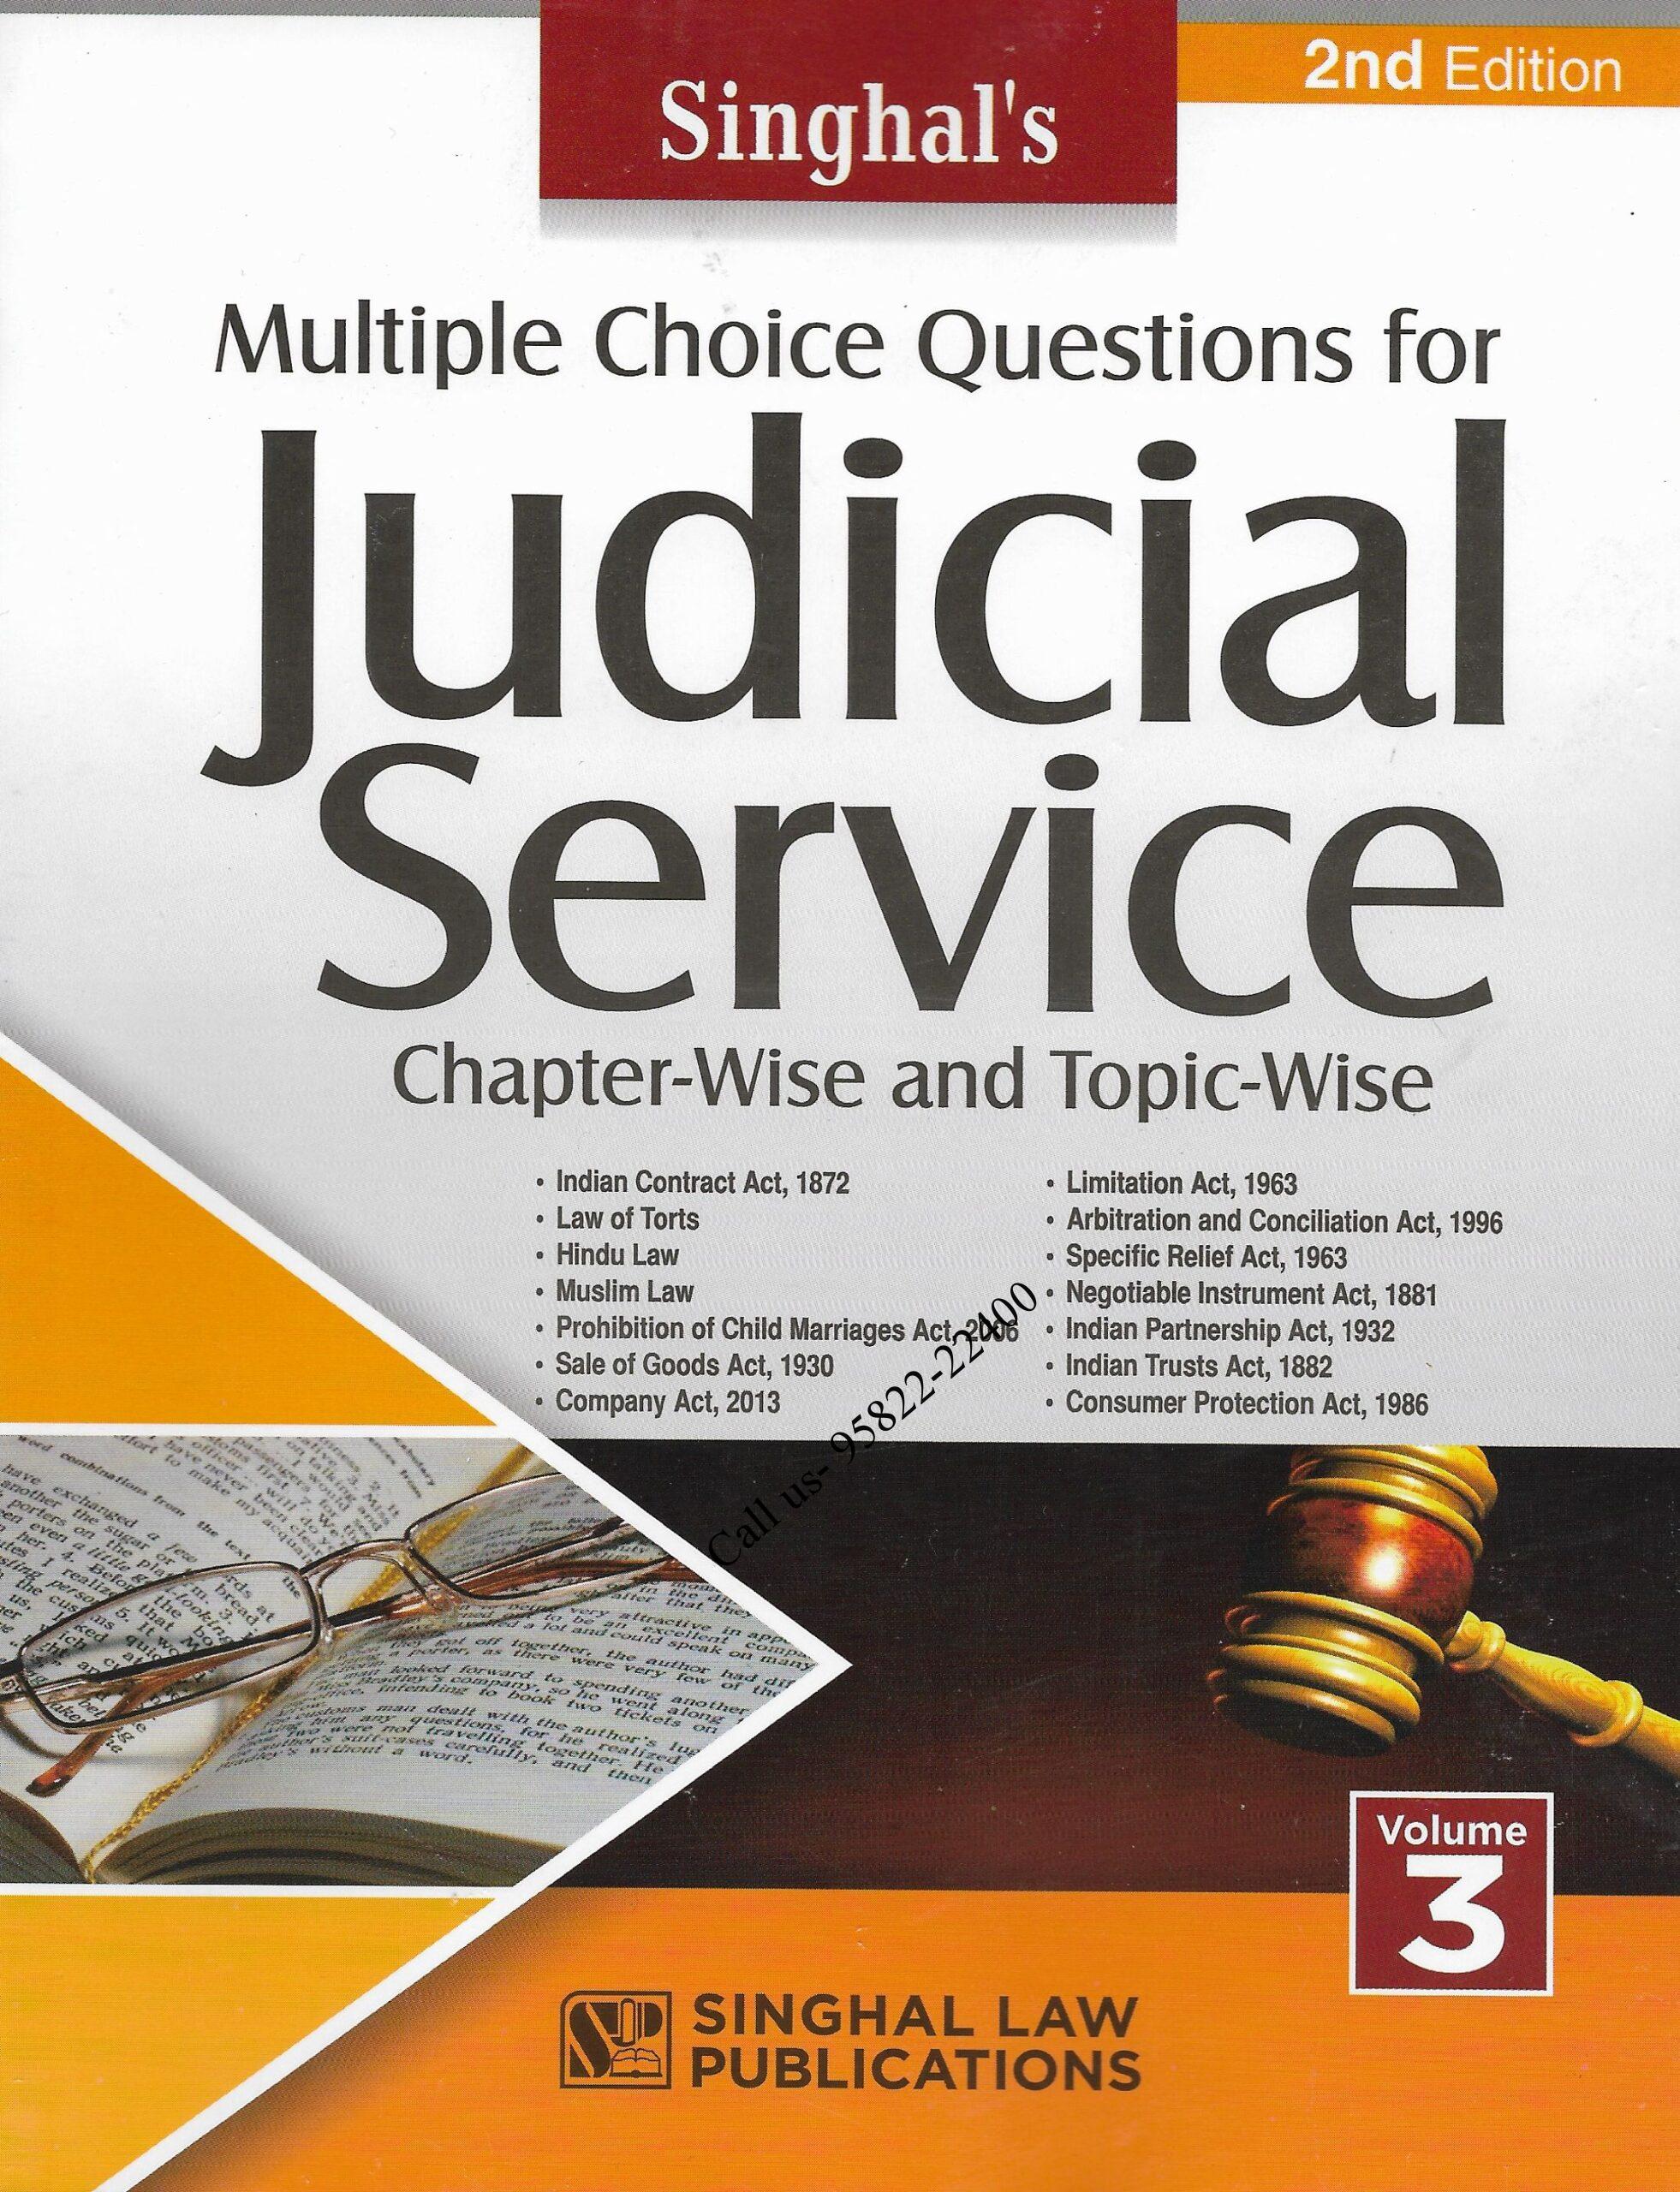 Singhal's Multiple Choice Questions for JUDICIAL SERVICE EXAMINATION (VOLUME 1)Multiple Choice Questions for JUDICIAL SERVICE EXAMINATION (VOLUME 3) Cover page